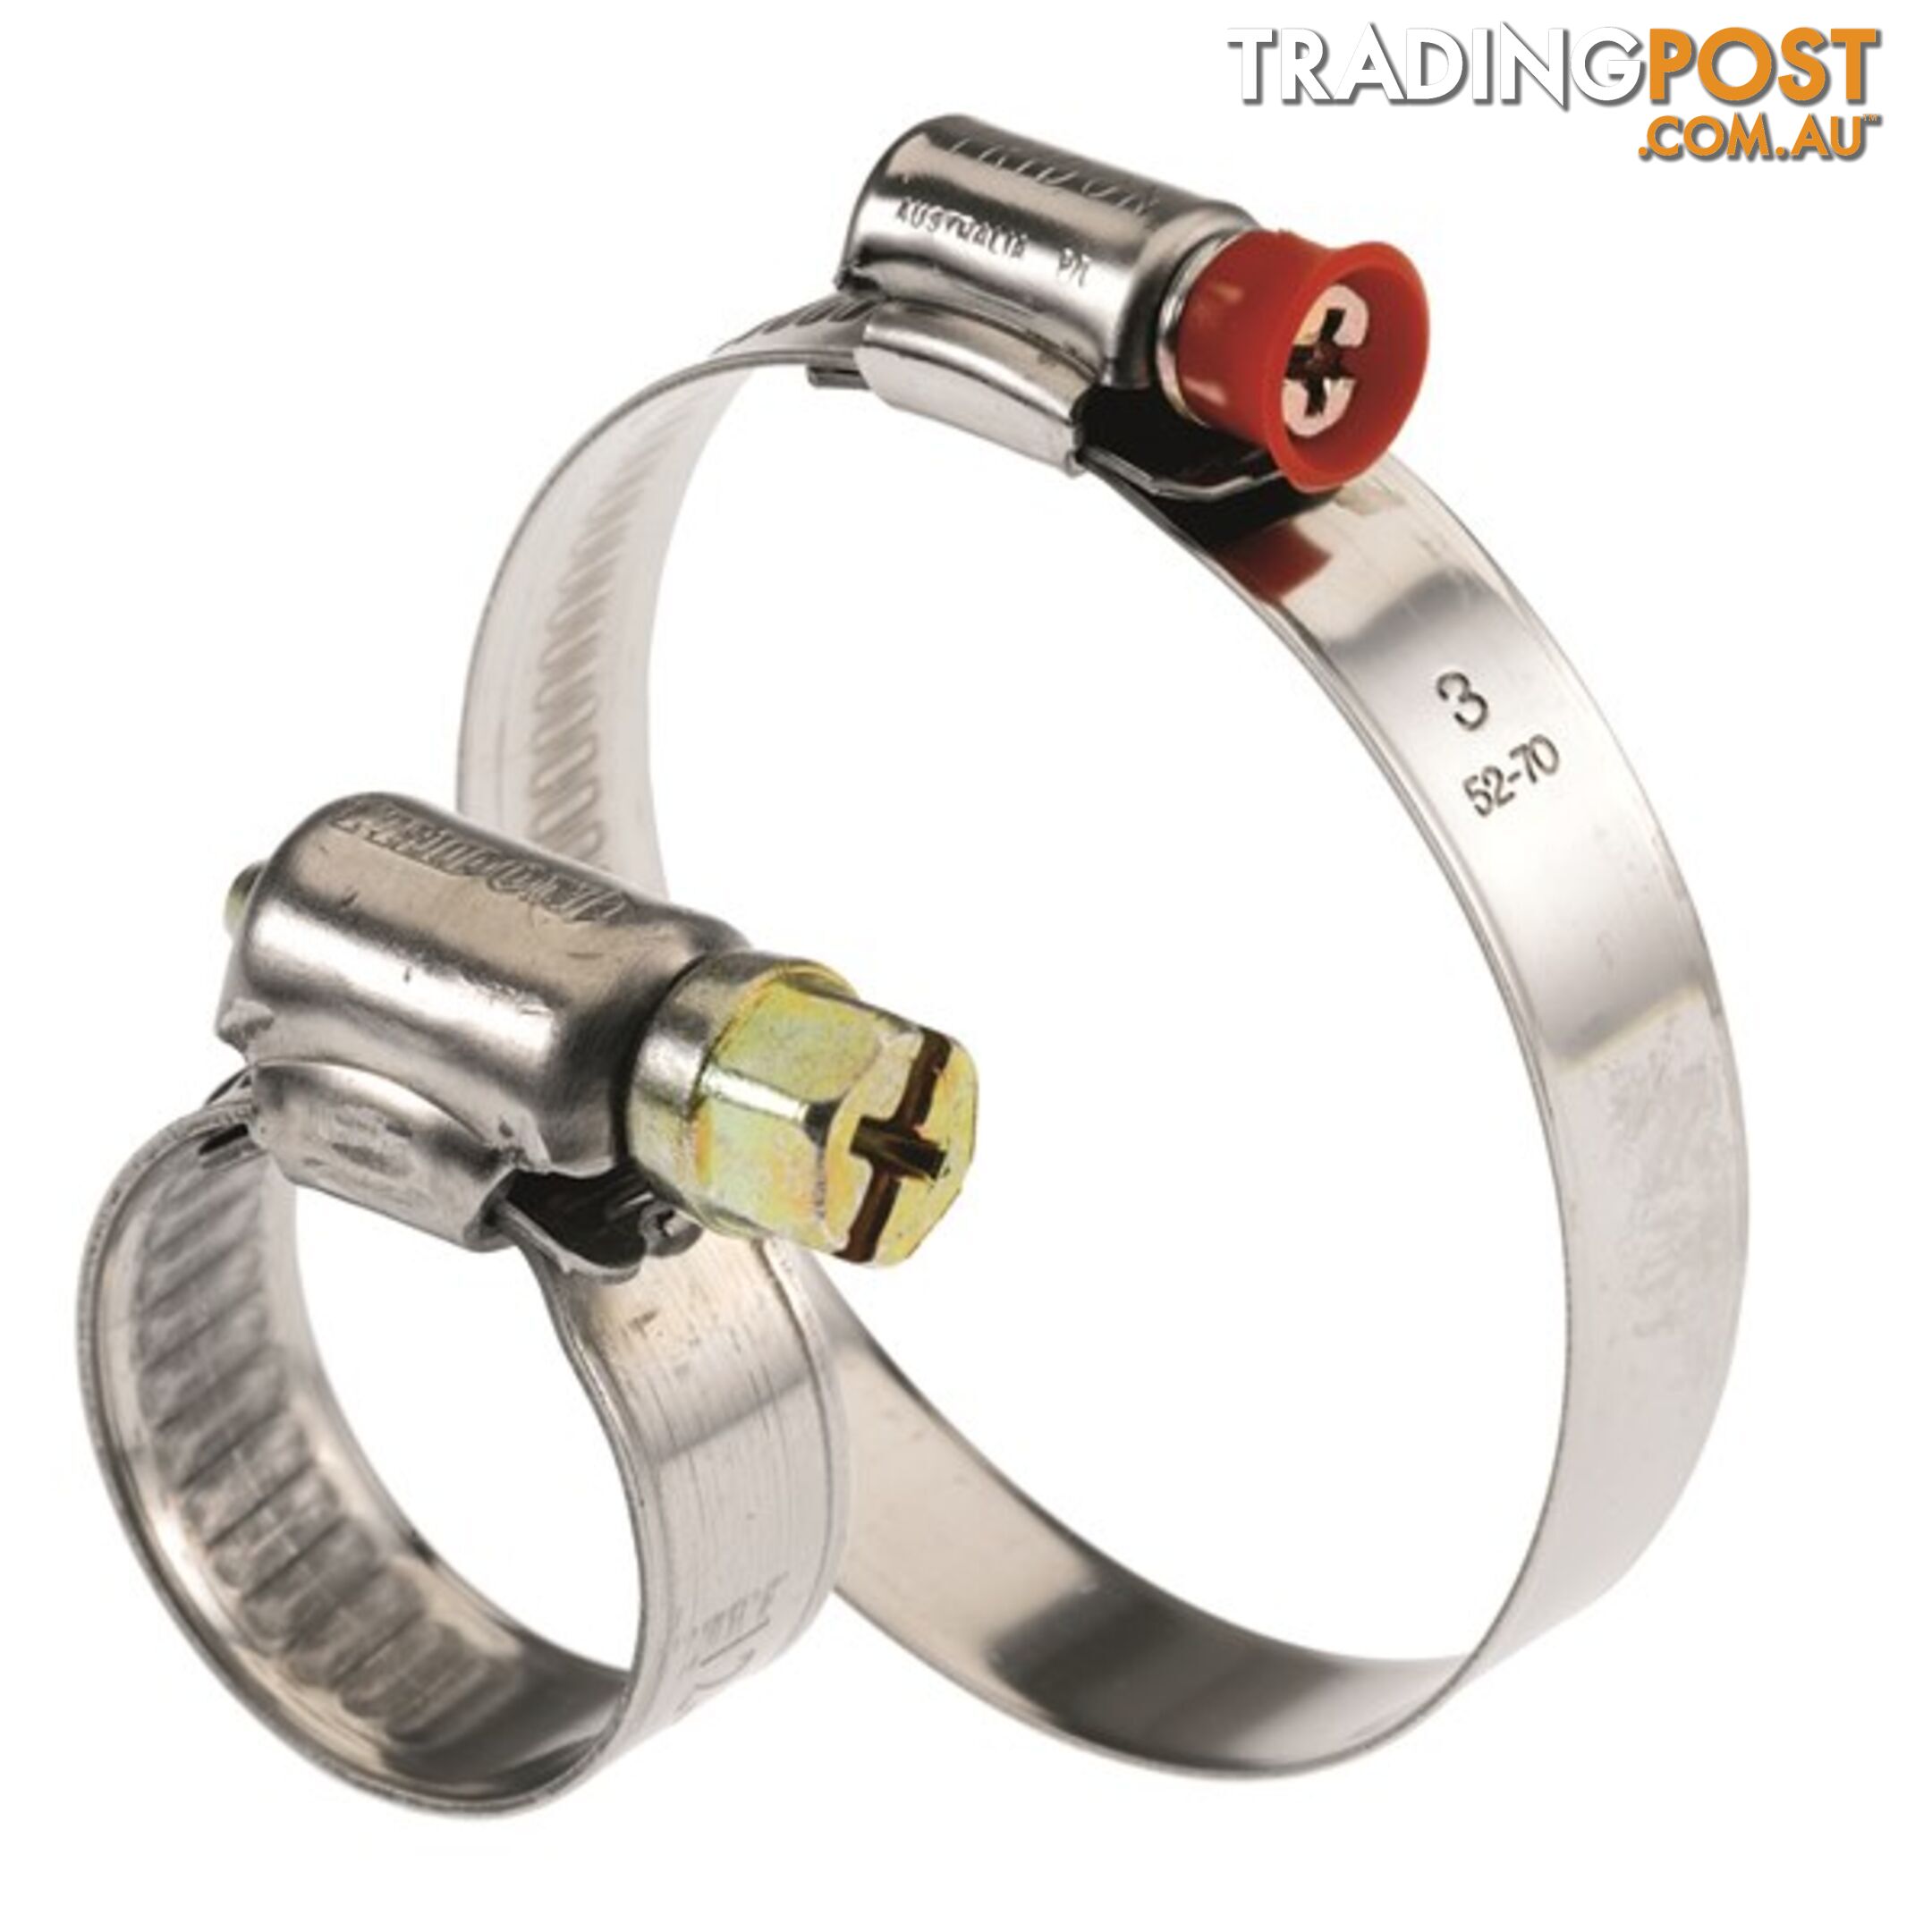 Tridon Part S.S Hose Clamp 35mm-48mm Multi Purpose Solid Band 10pk SKU - MP2AP